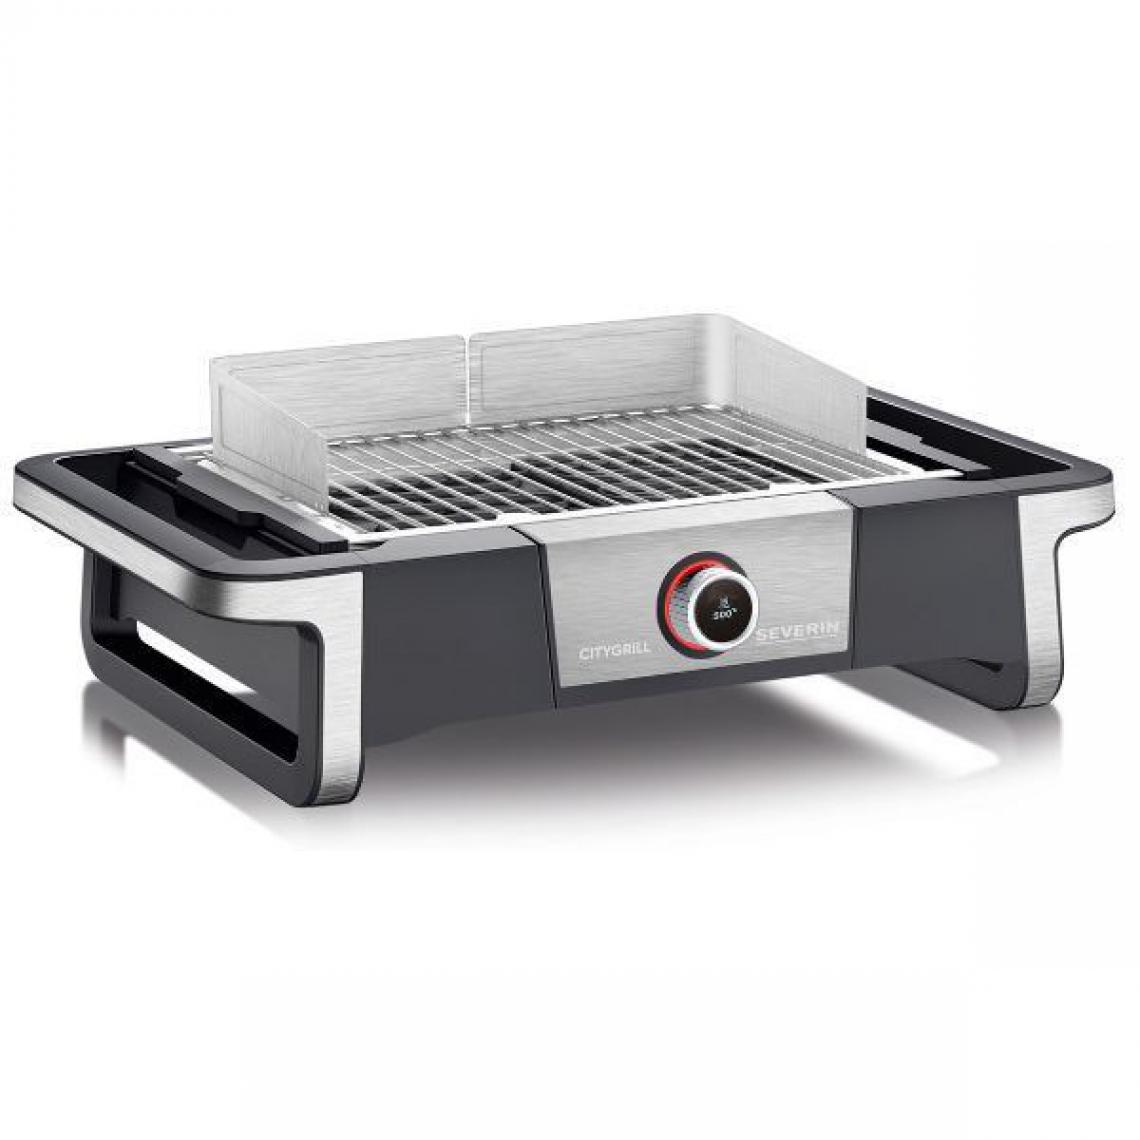 Severin - BARBECUE GRIL 3000W ZONE BOOST TH 80 A 500°C SONDE GRILLE INOX PARE VEN SEVERIN - 8114 - Barbecues électriques